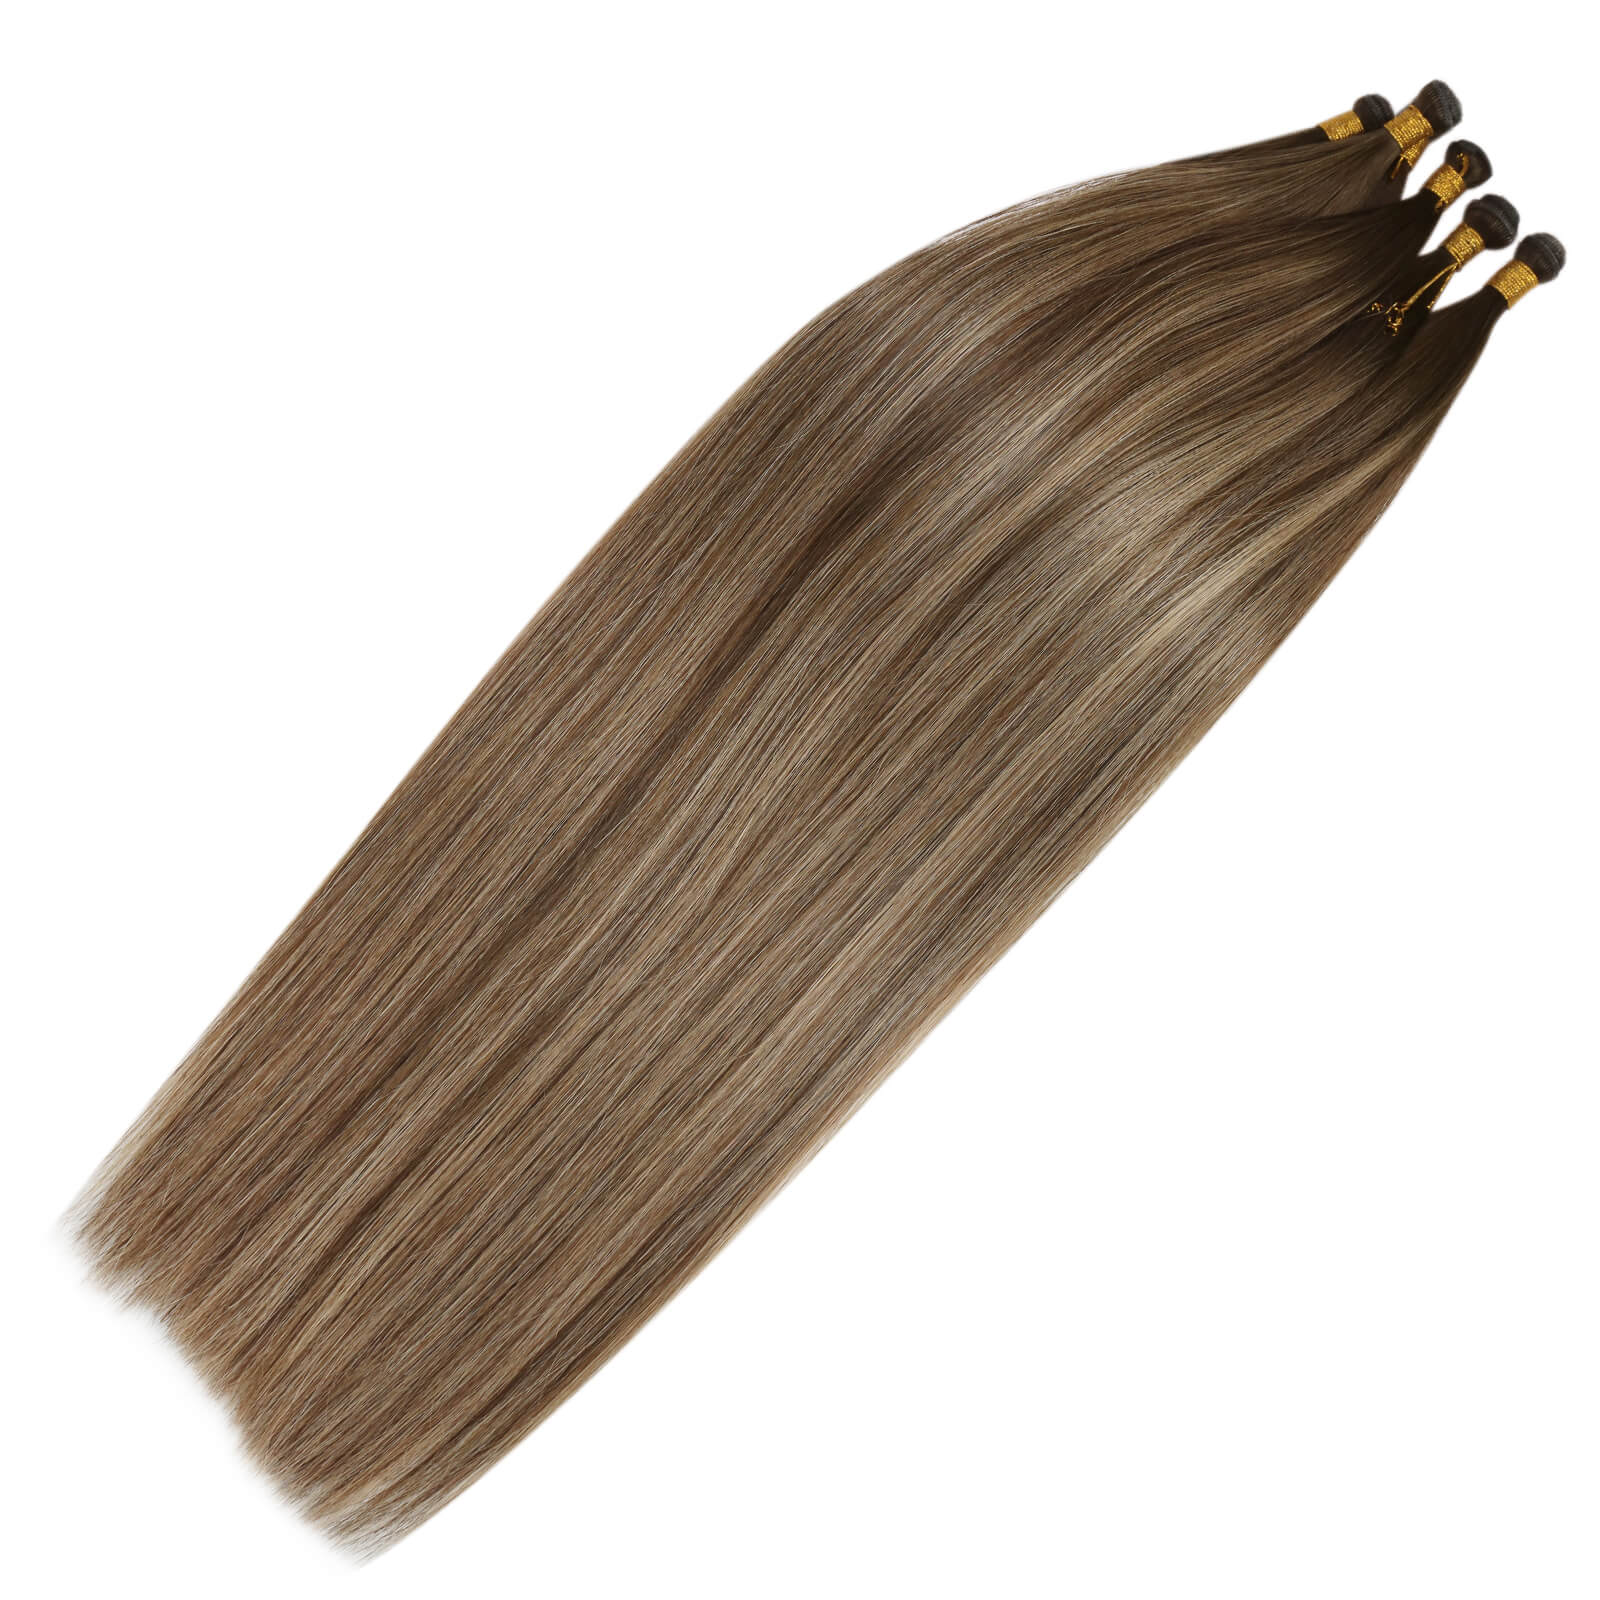 invisible weft hair extensions genius weft